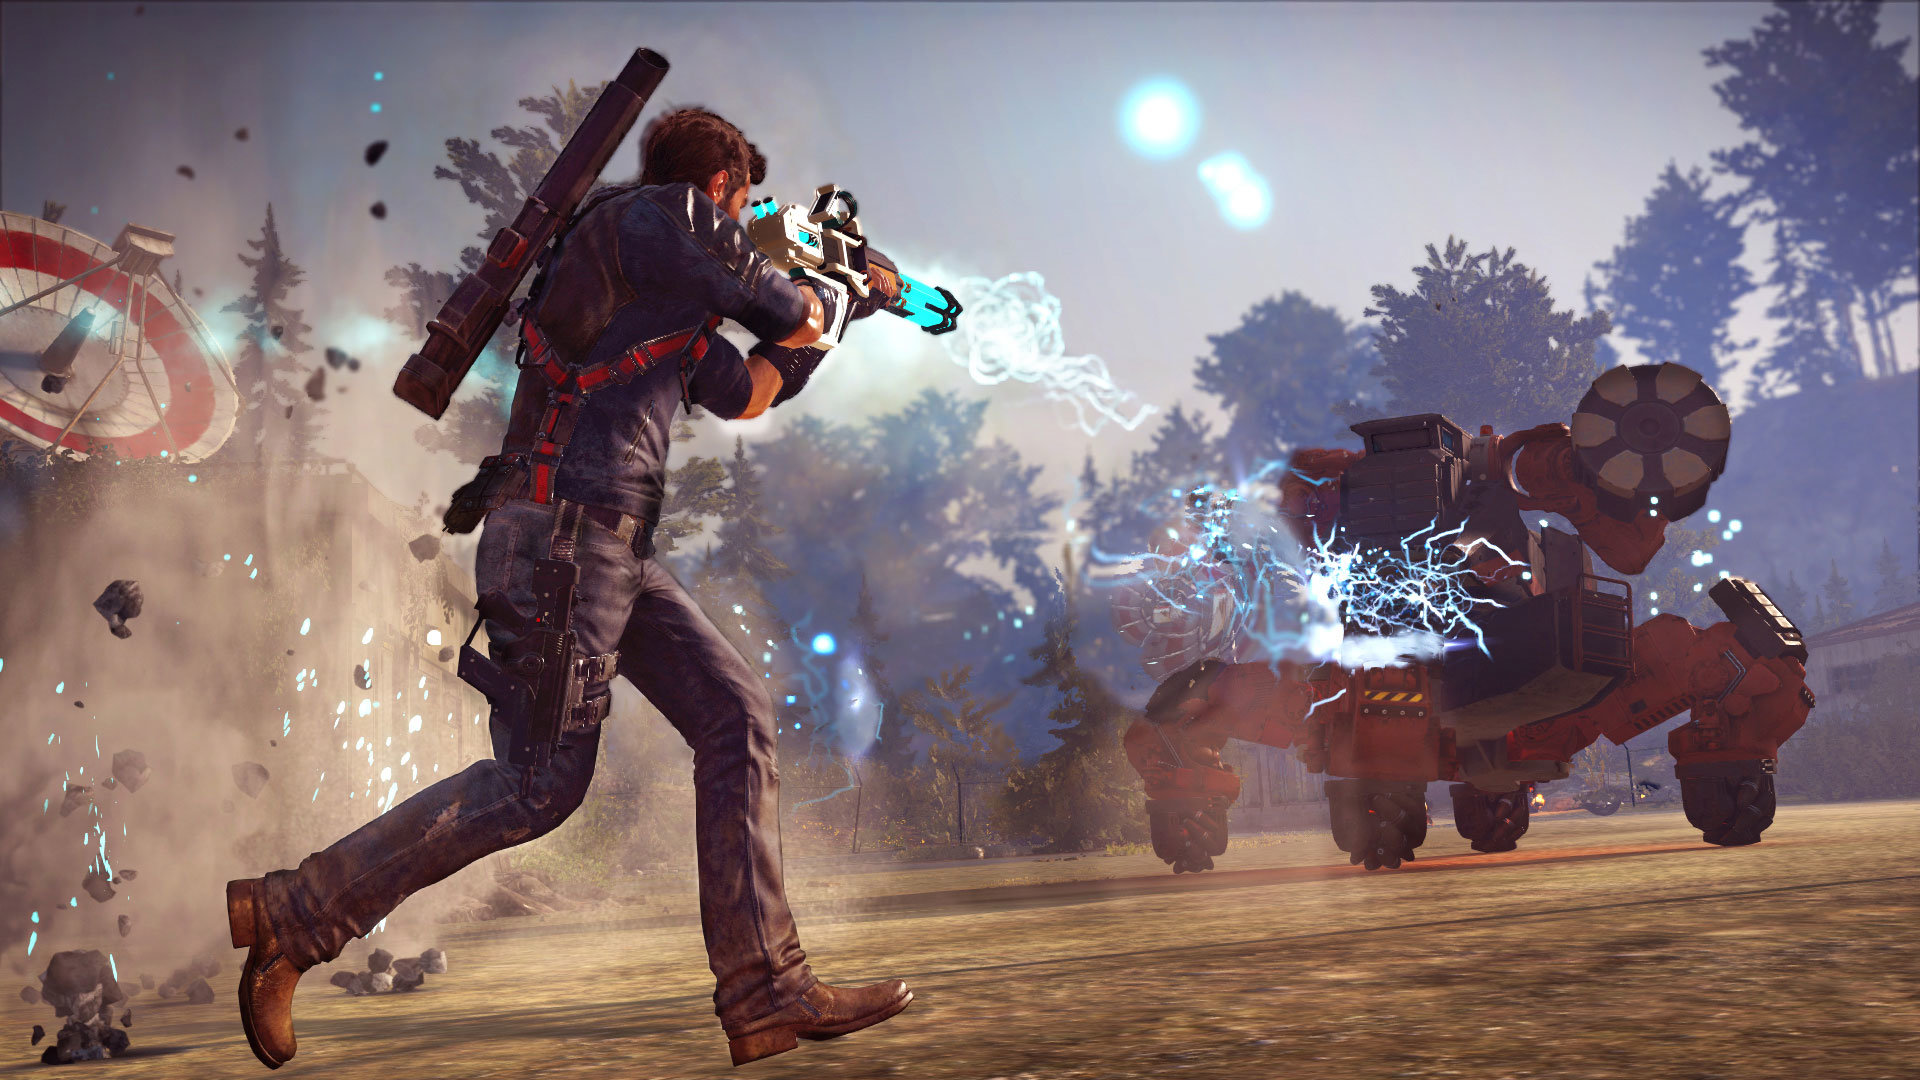 Awesome Just Cause 3 free wallpaper ID:137979 for hd 1920x1080 desktop